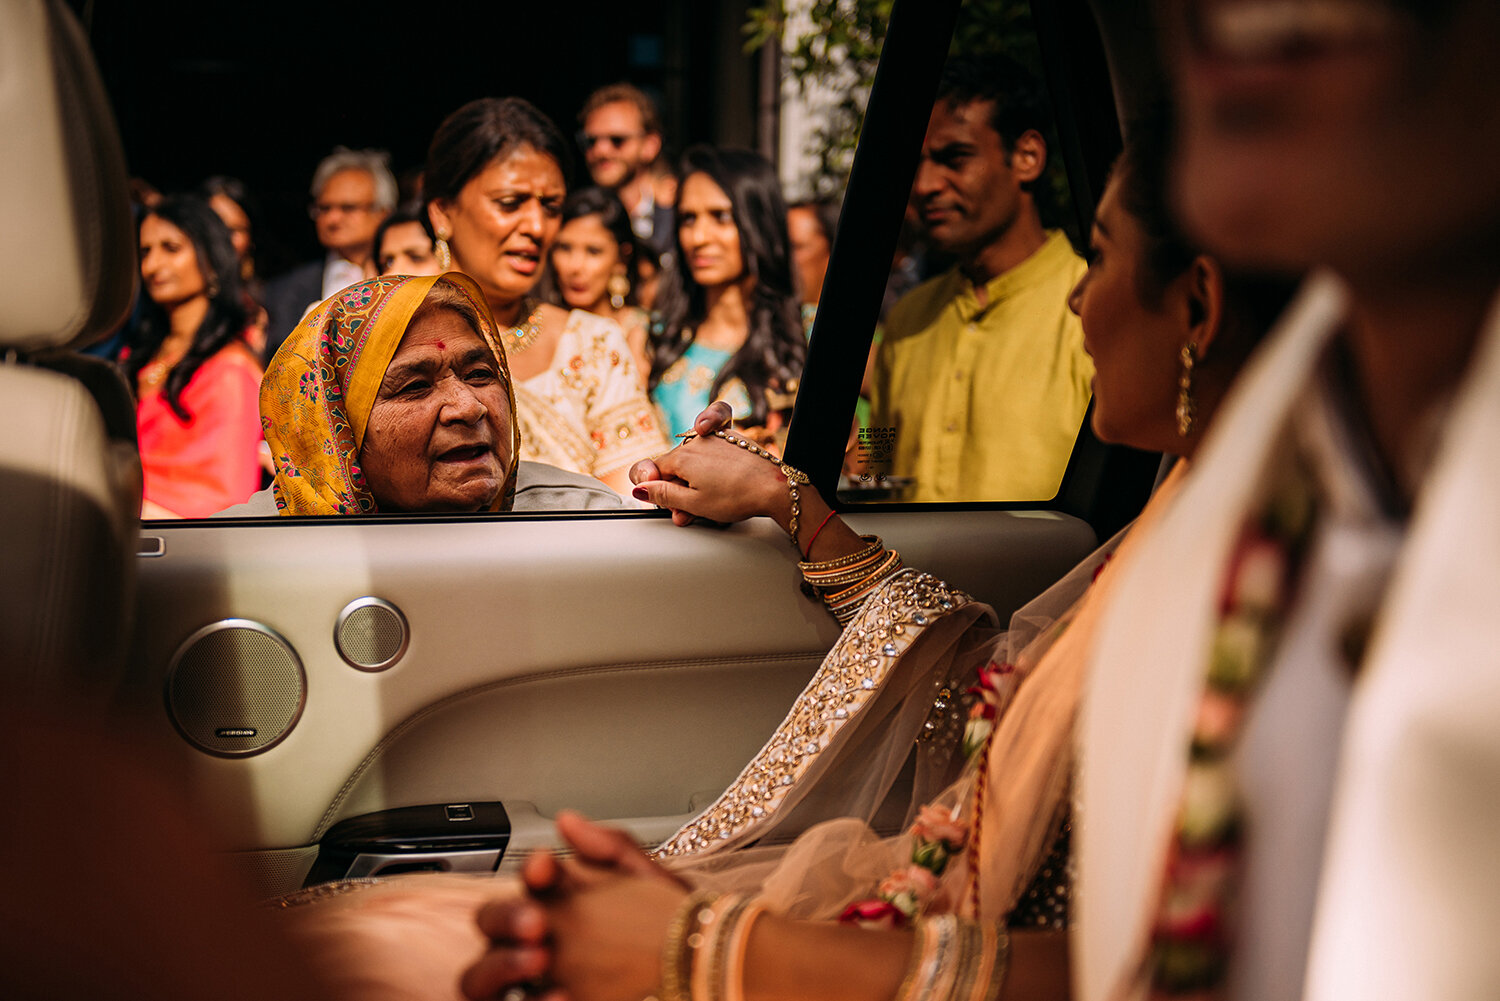  elderly relative holding the brides hand through the car window, and emotional ‘farewell’ 